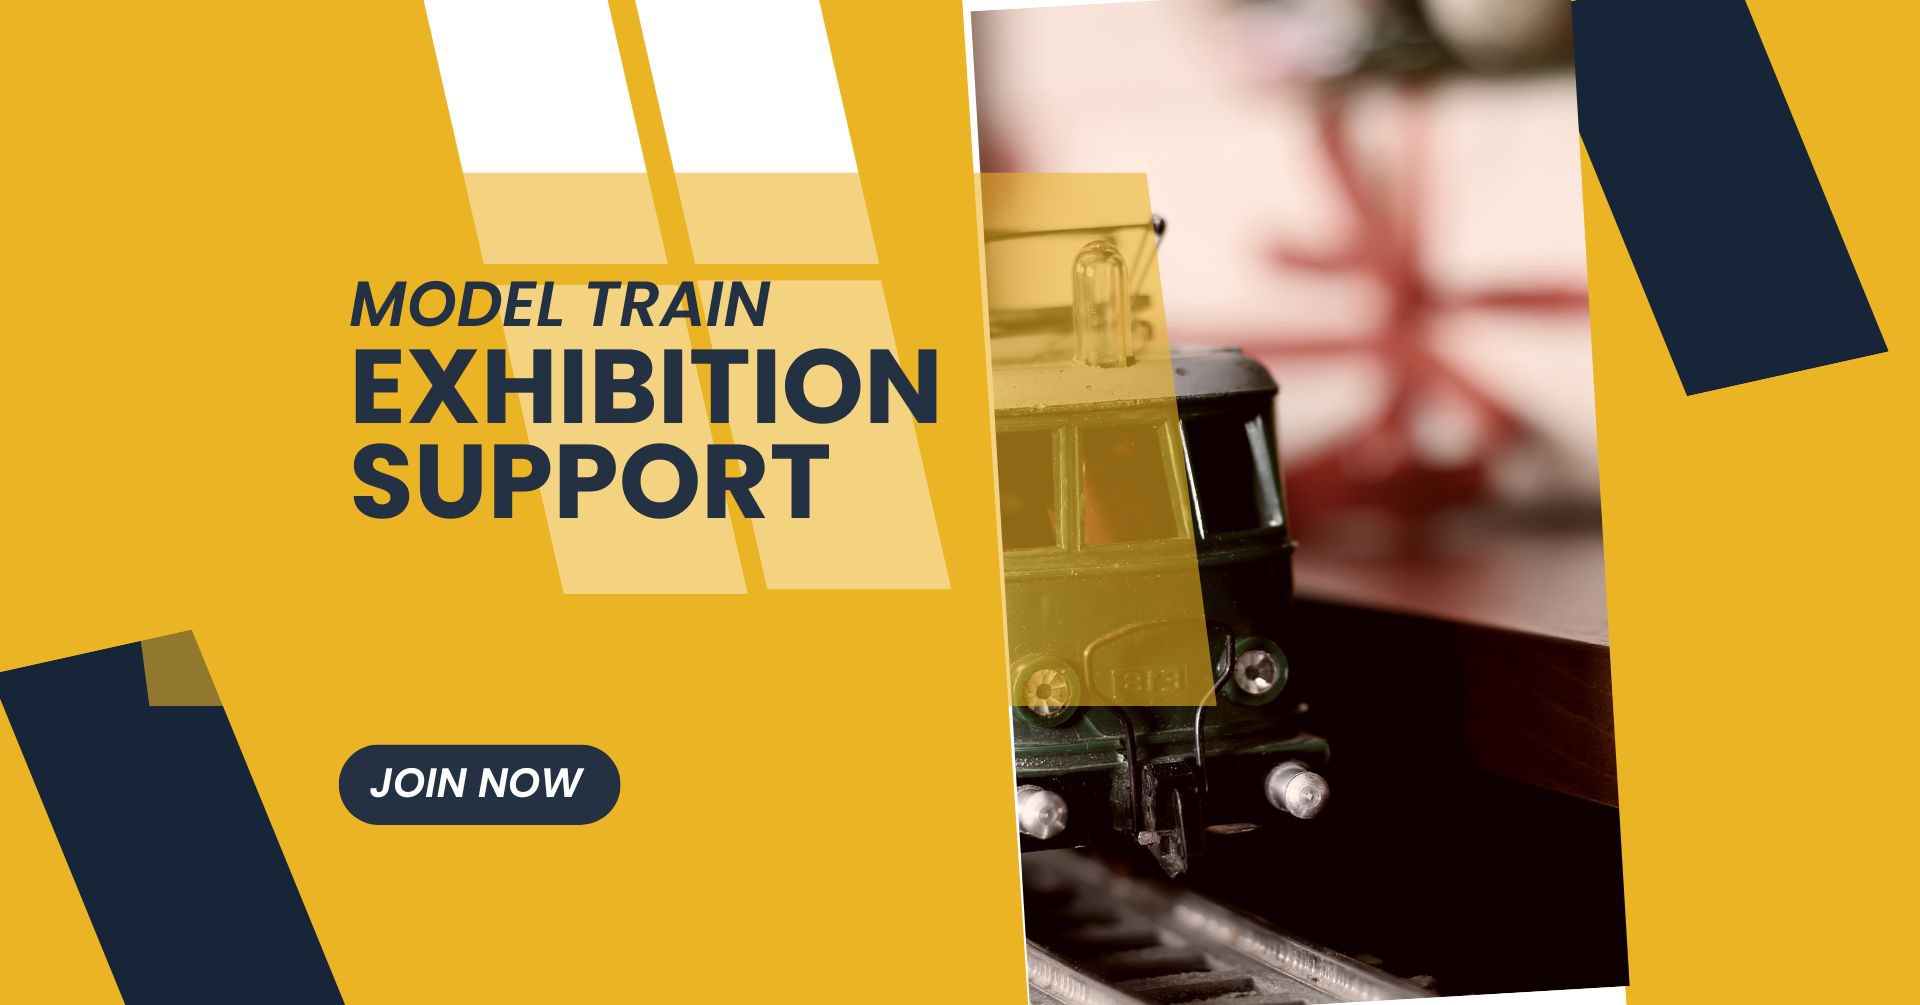 Job opening at JBF Toys and Trains - Model train exhibition support